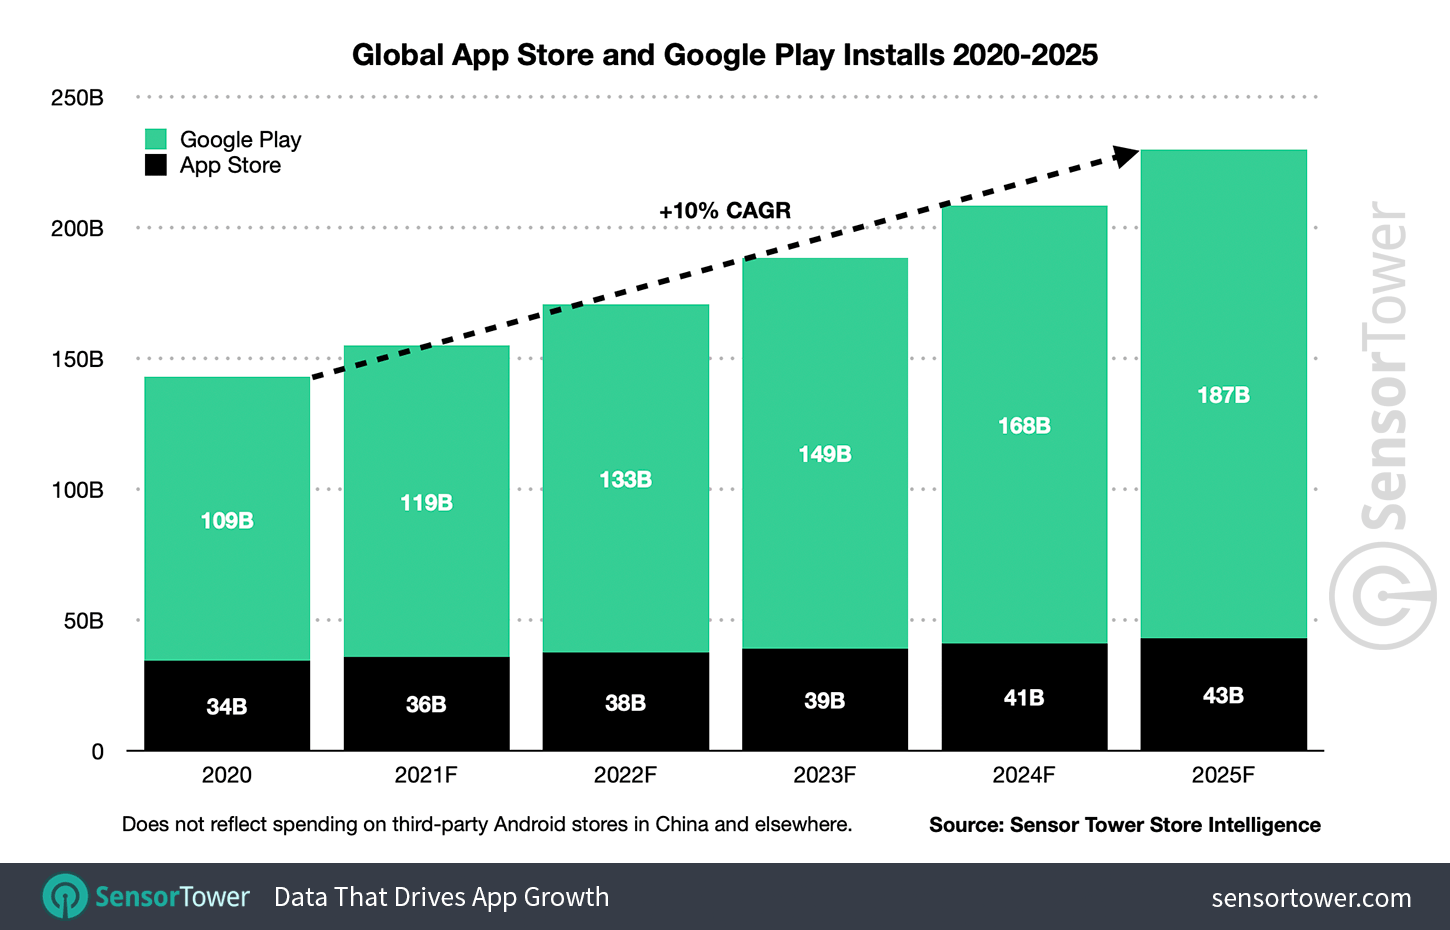 Worldwide installs across the App Store and Google Play will reach 230 billion in 2025